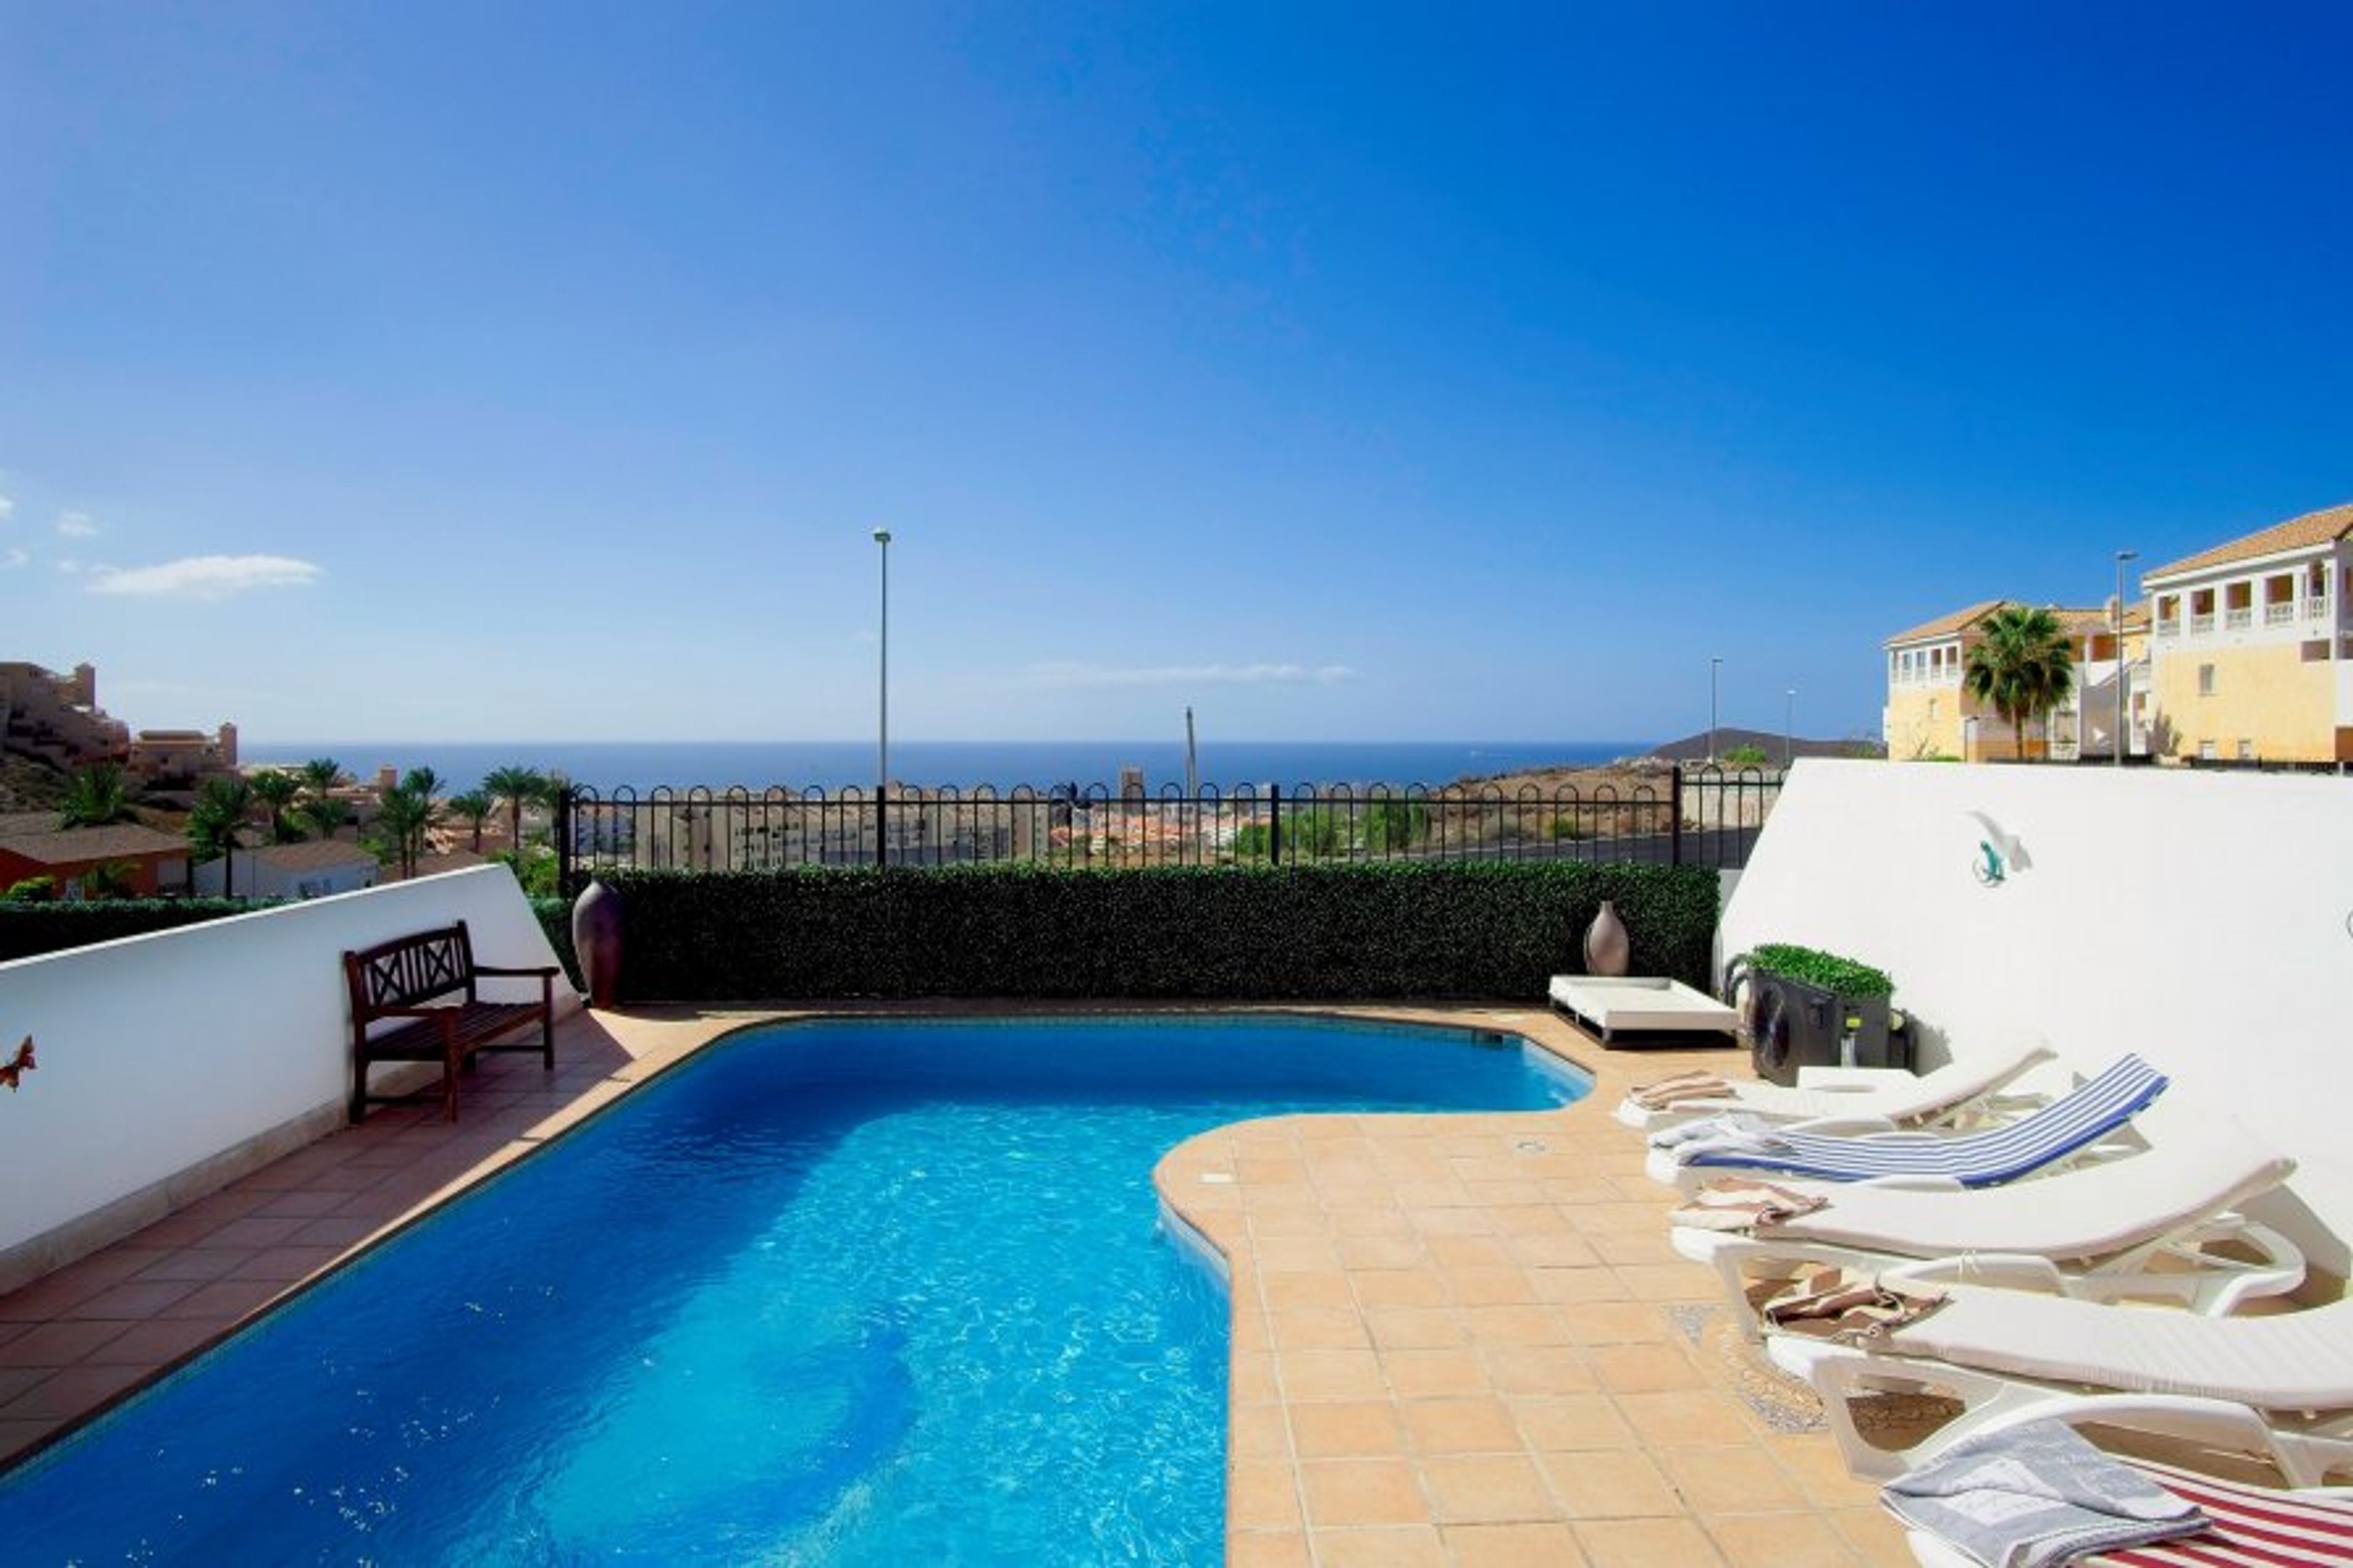 Swimming pool with sea views in the distance